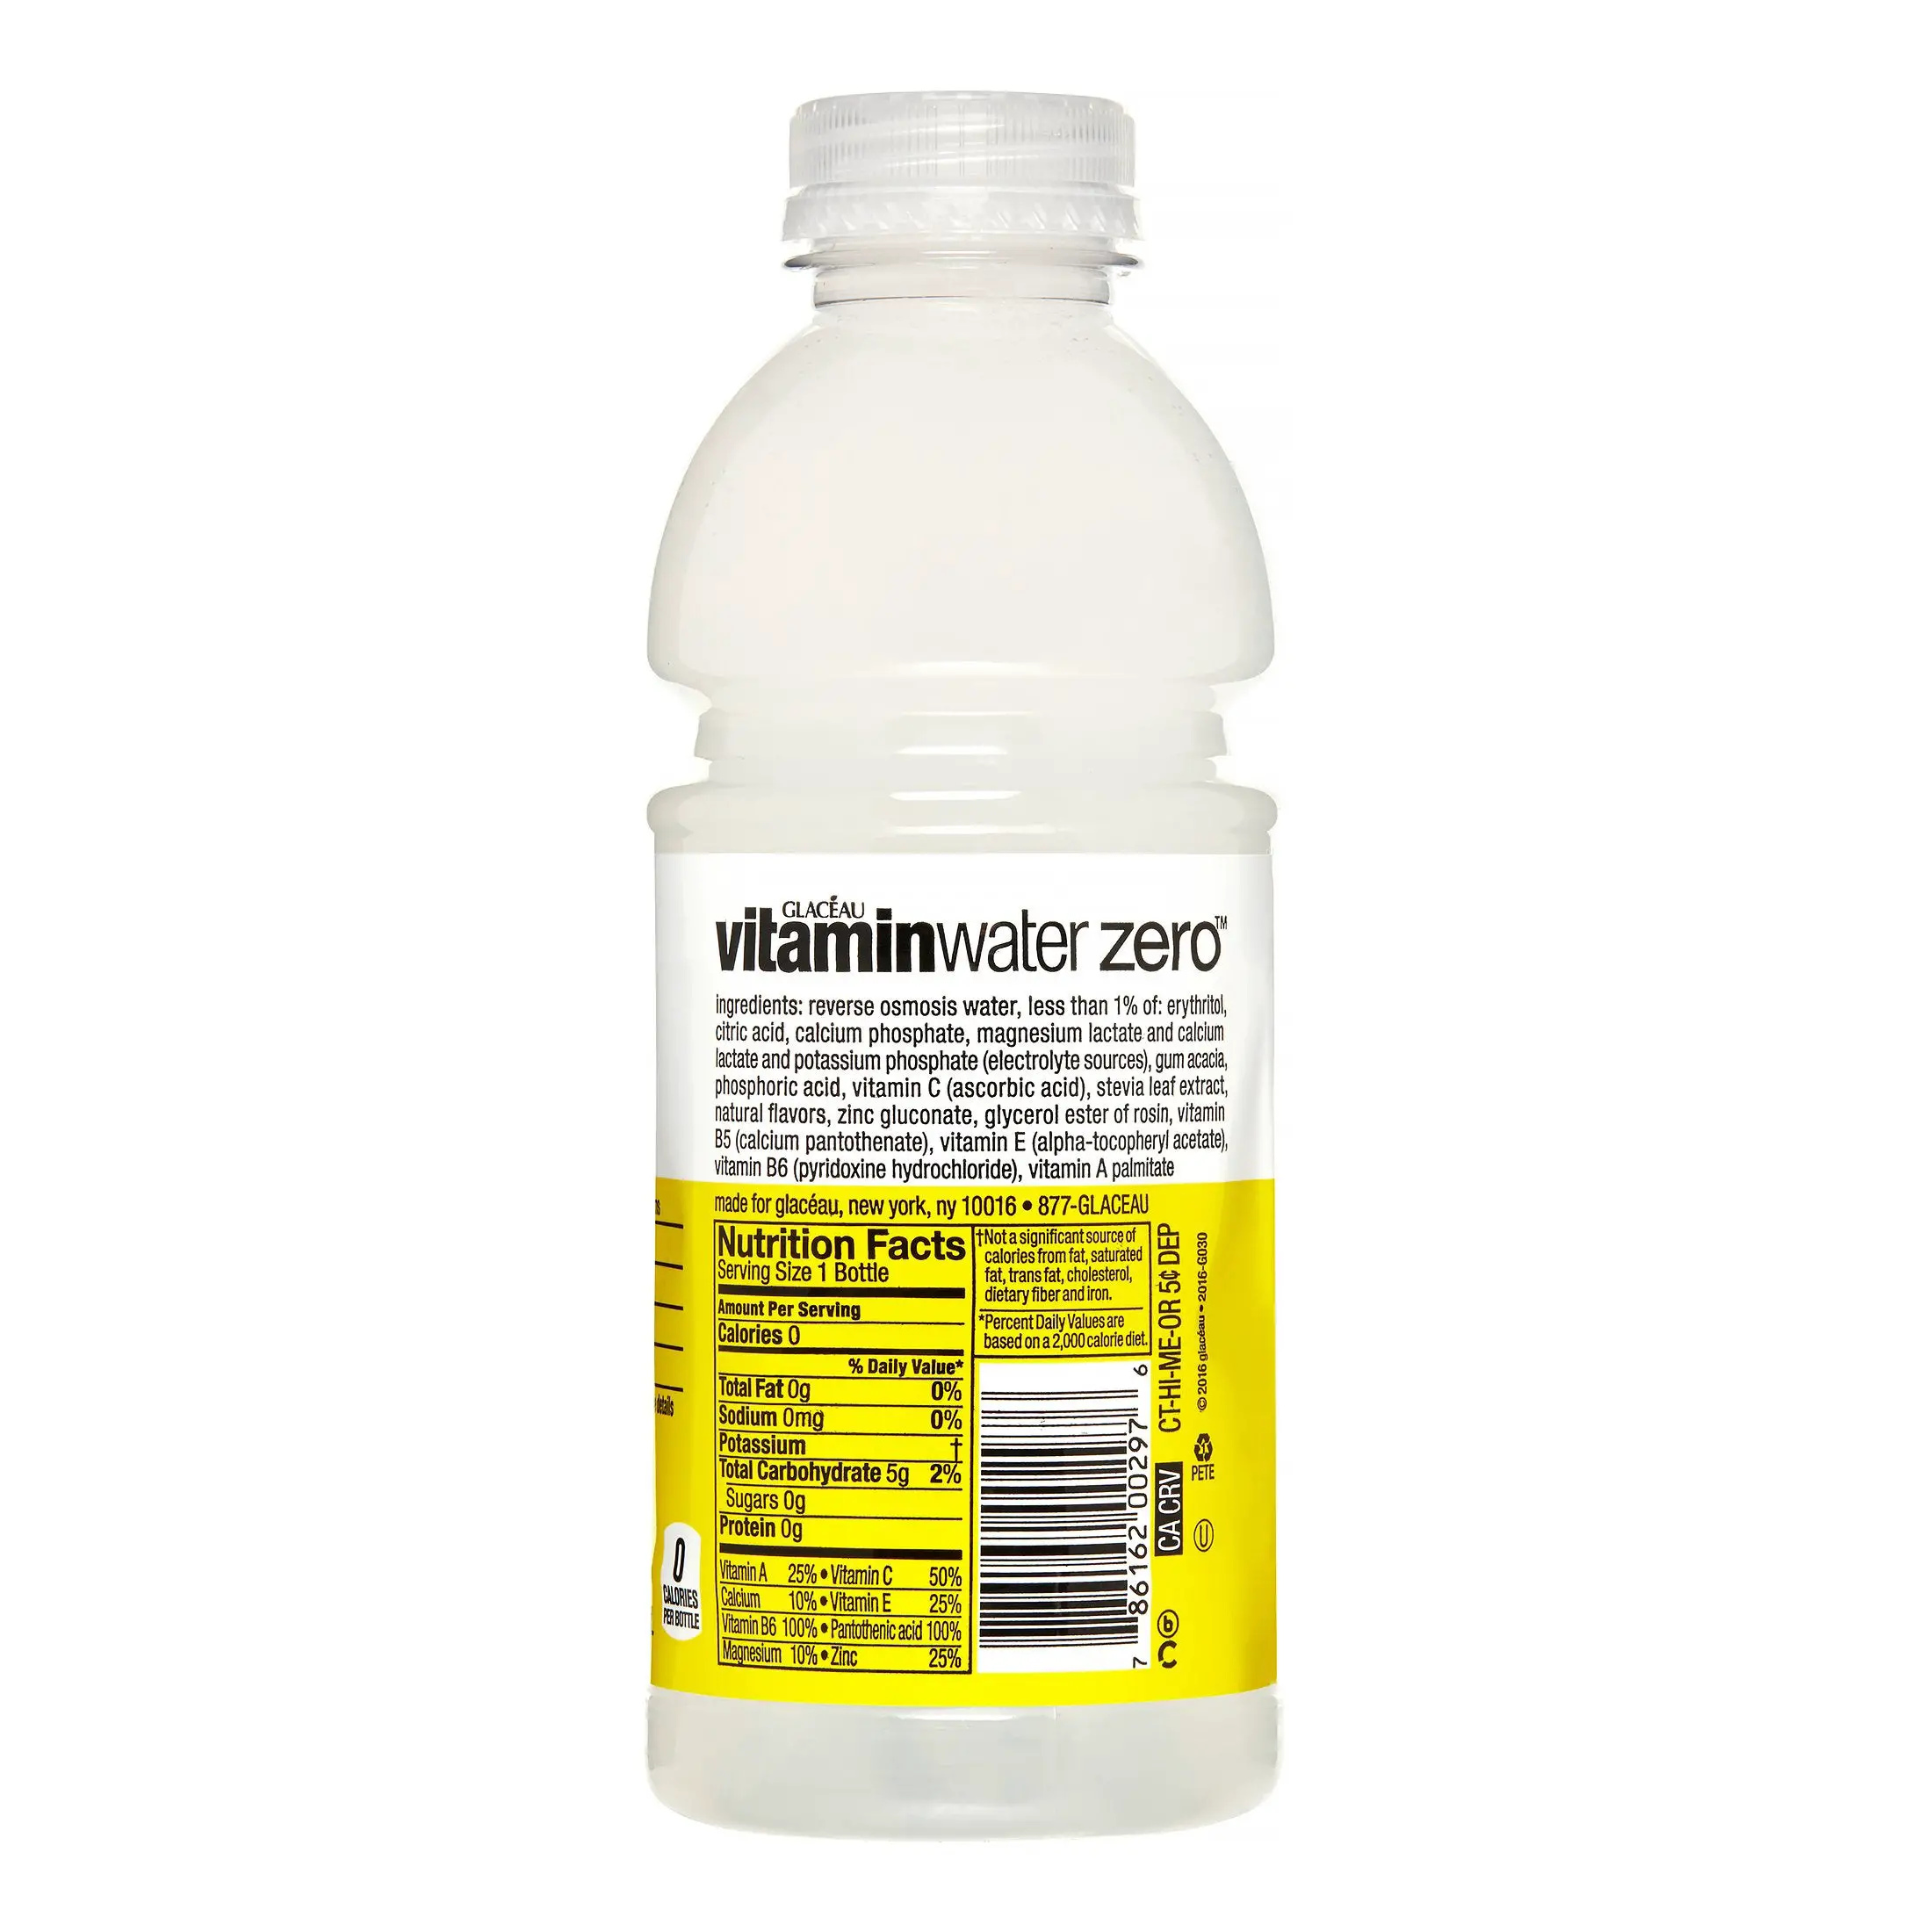 Vitamin Water: Zero Calories but 5g Carbohydrates : keto